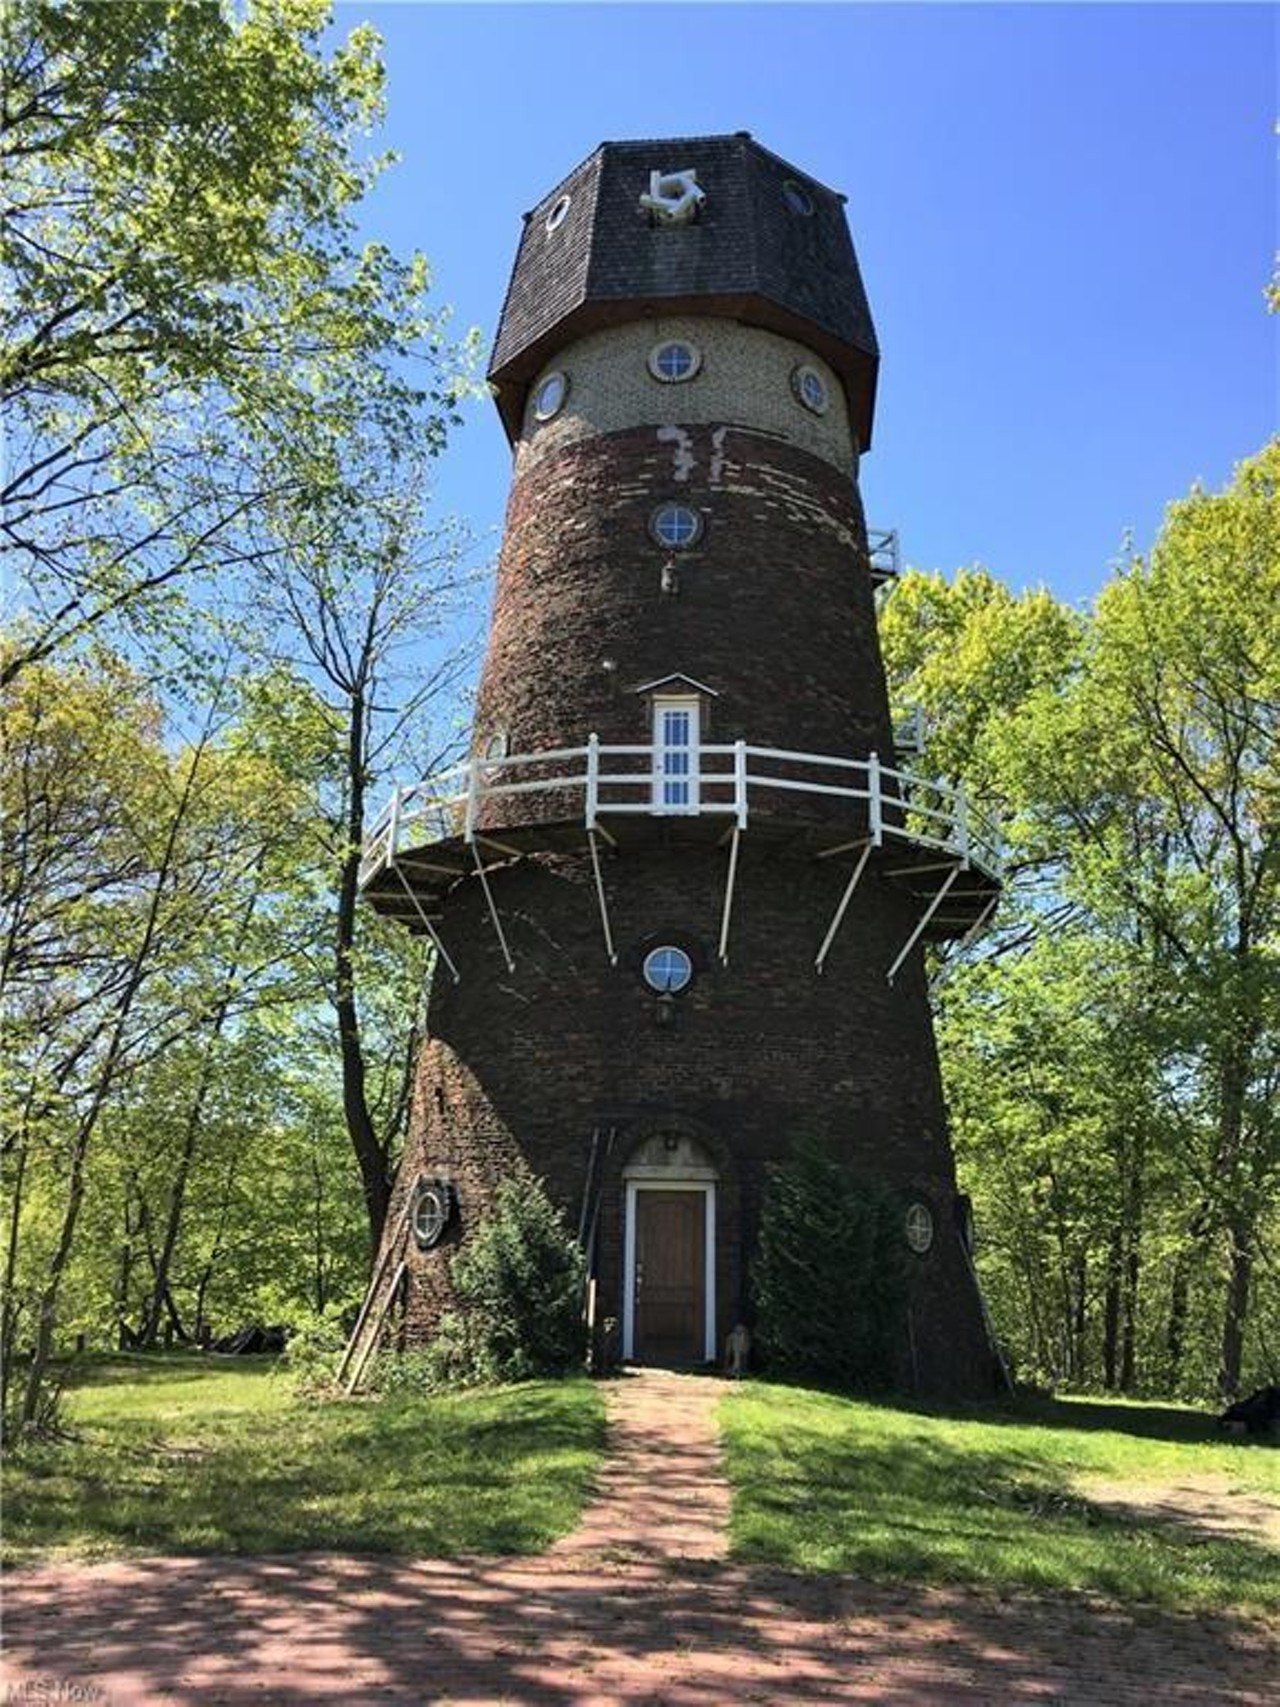 You Can Live In An Actual Windmill In Lorain For $280,000